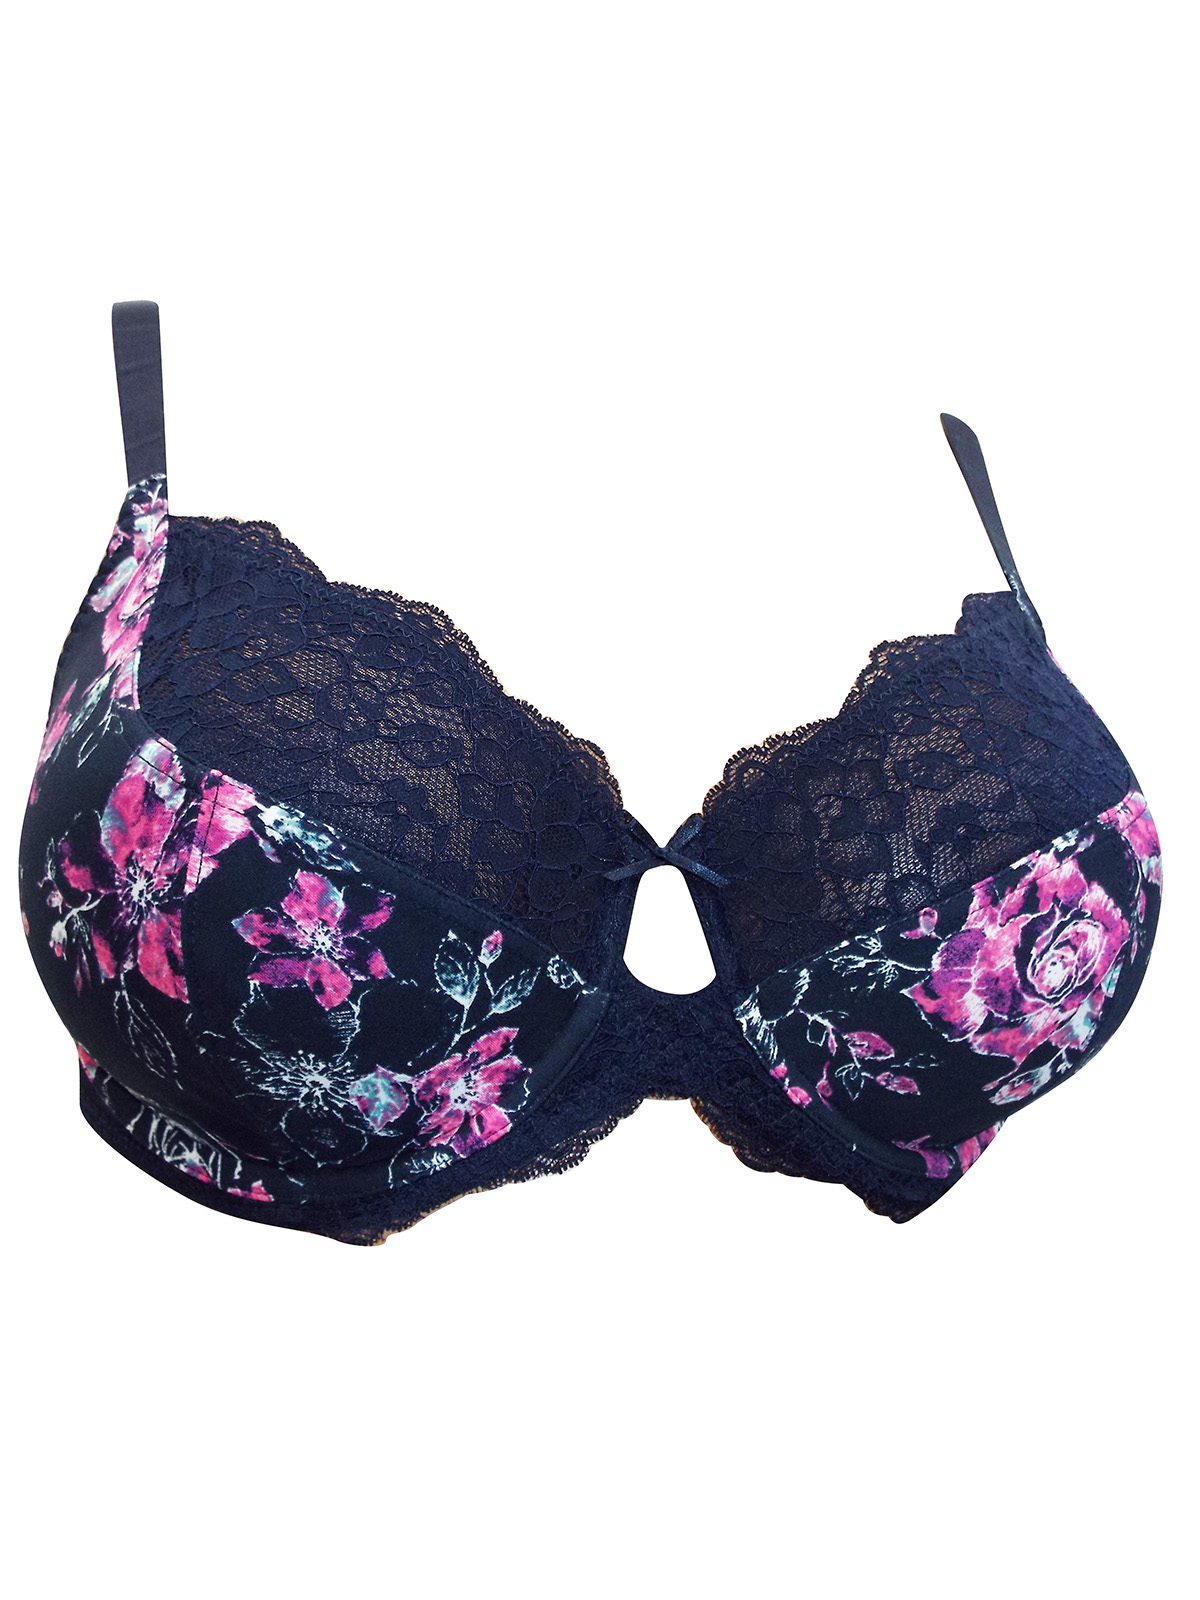 George - - G3ORGE NAVY Floral Print Non-Padded Full Cup Bra - Size 36 to 42  (C-D-DD-E-F-G)